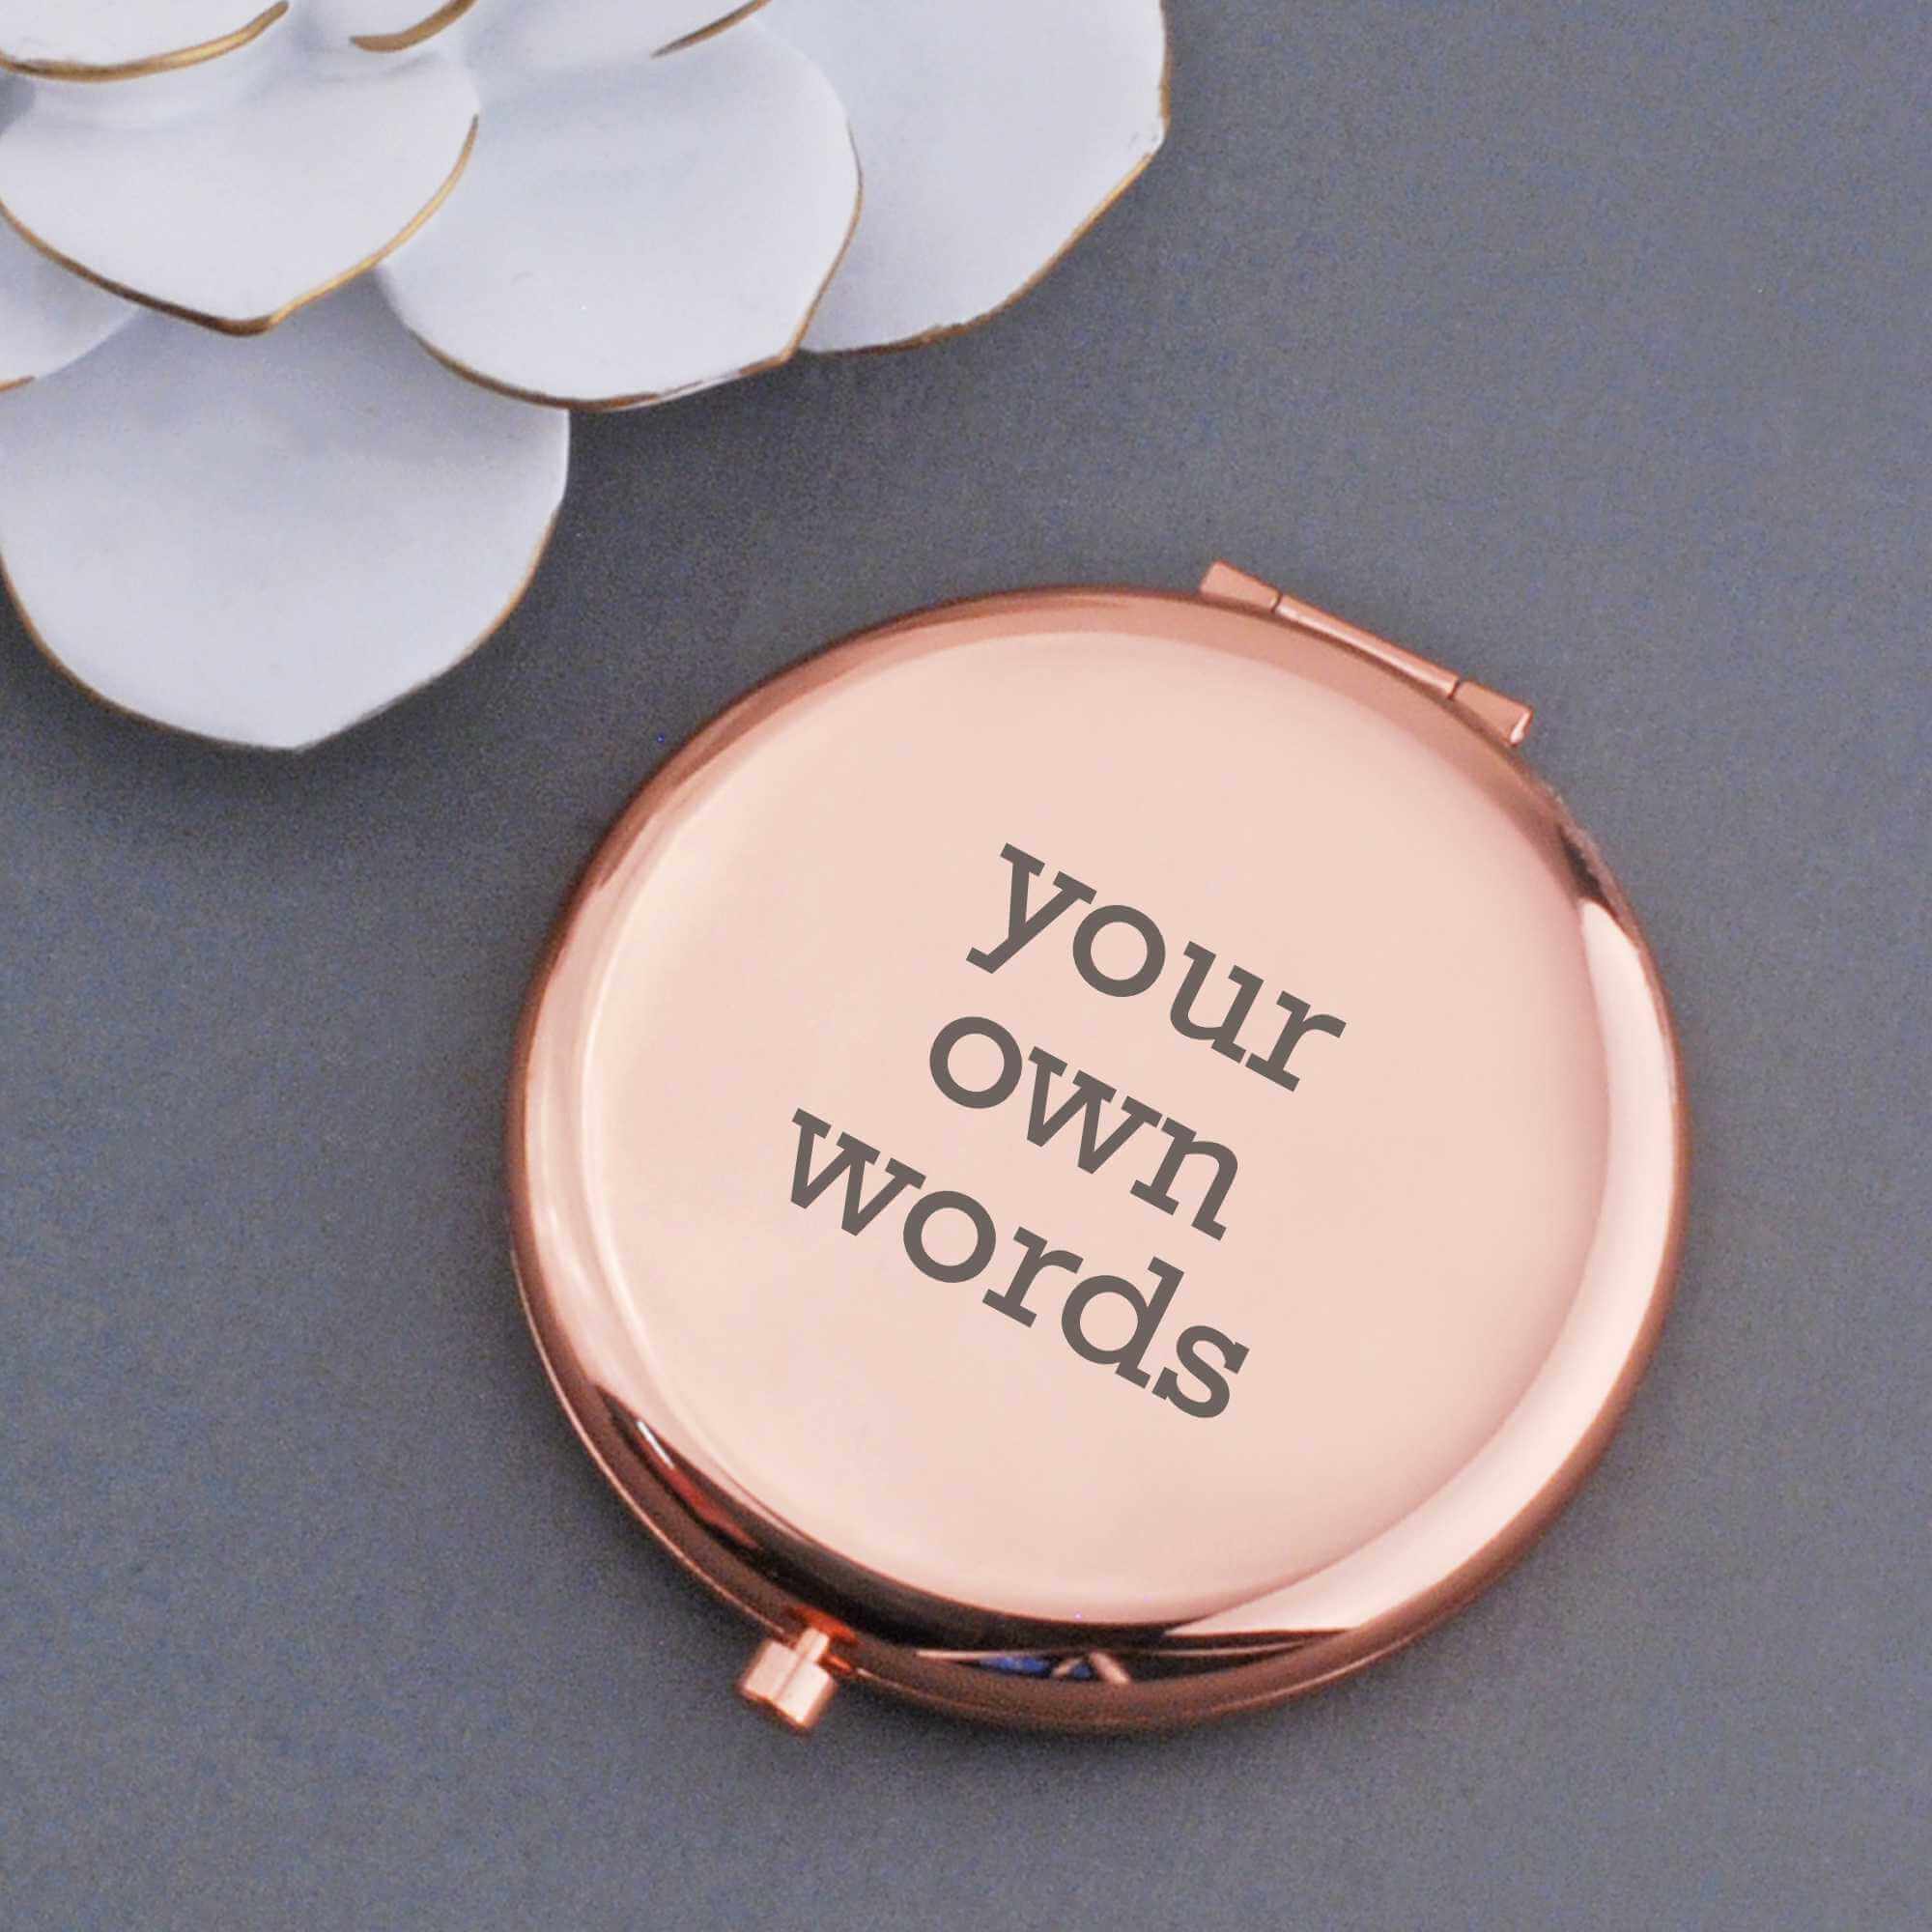 Compact Mirror Engraved with Your Own Words